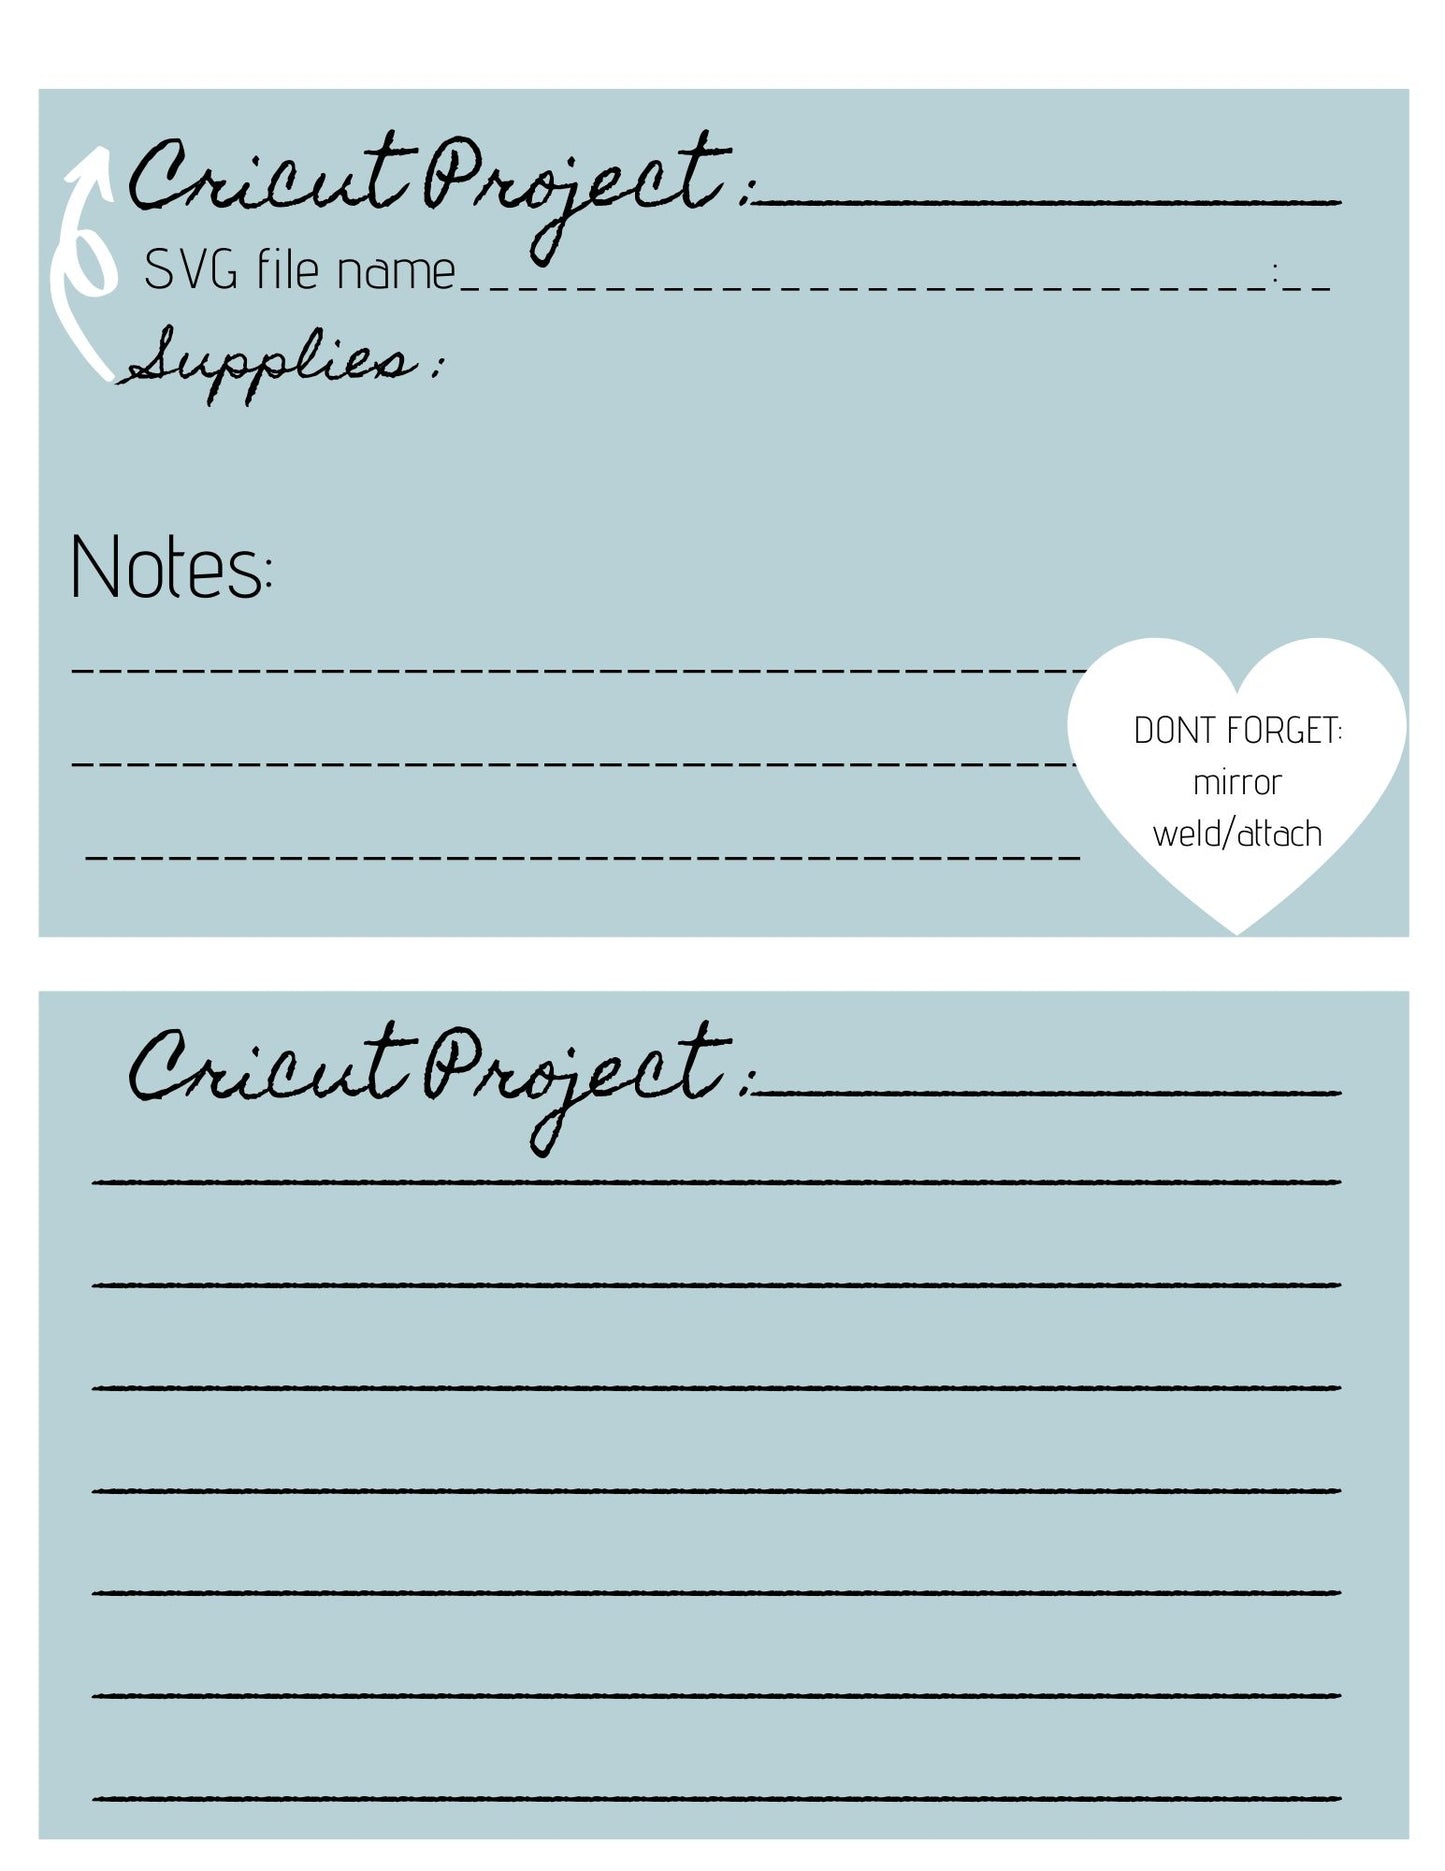 Printable Cricut Project Cards with Bonus Cricut themed Print and Cut stickers